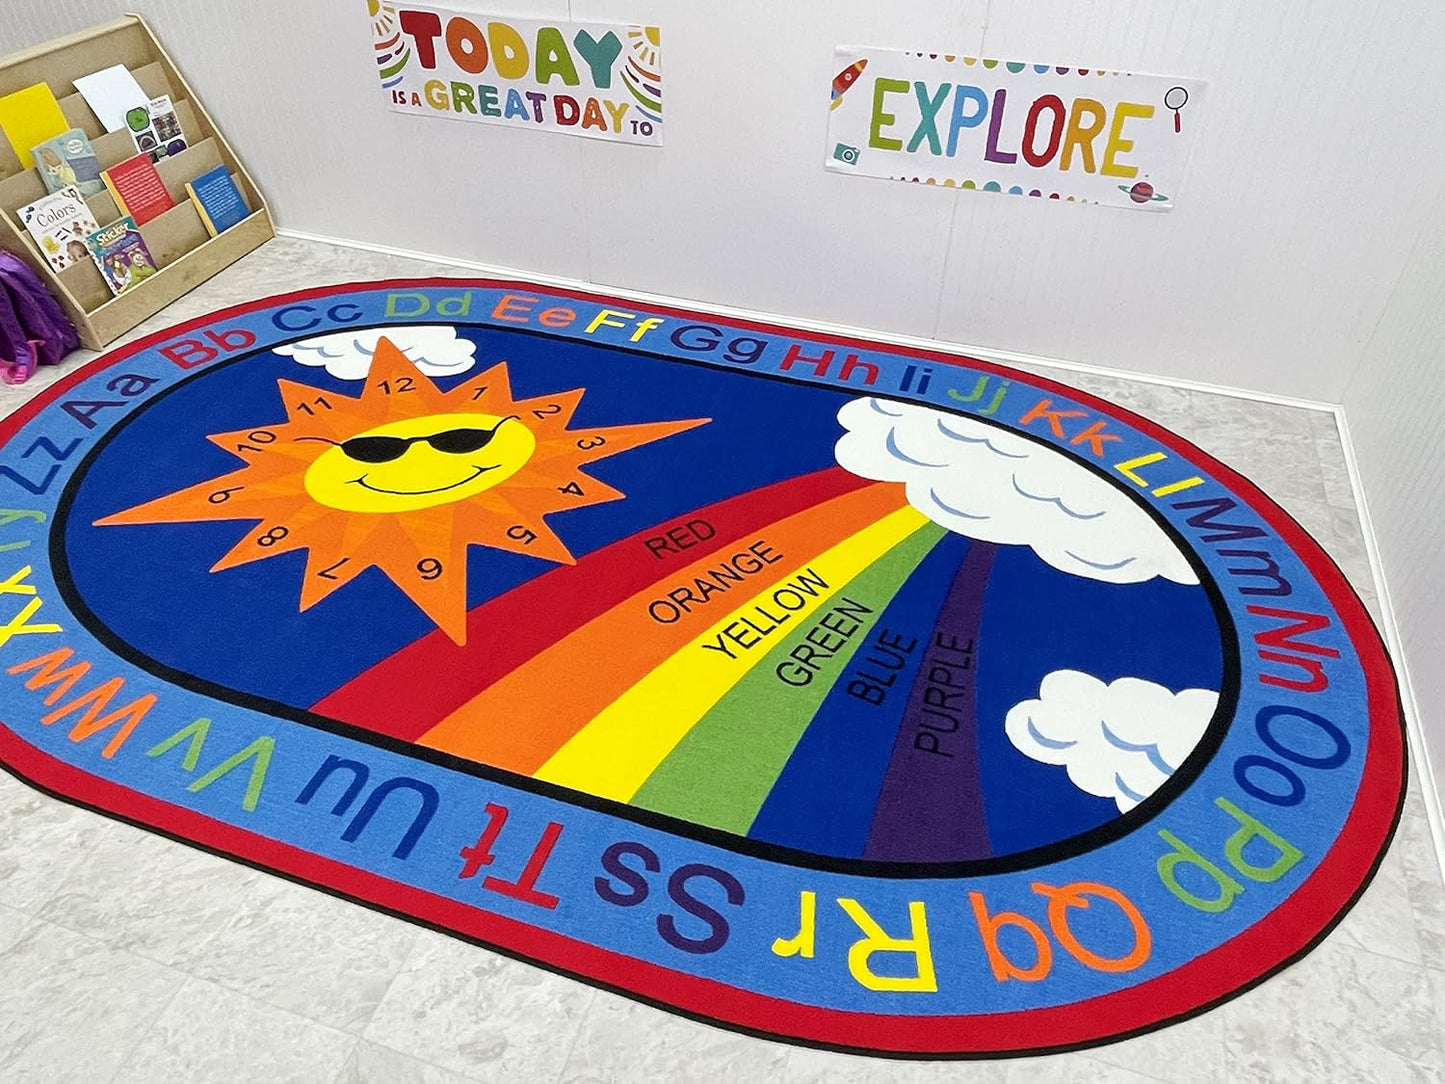 Oval Classroom Rug 'Sky's The Limit' by KidCarpet, Size 6' x 8'6""